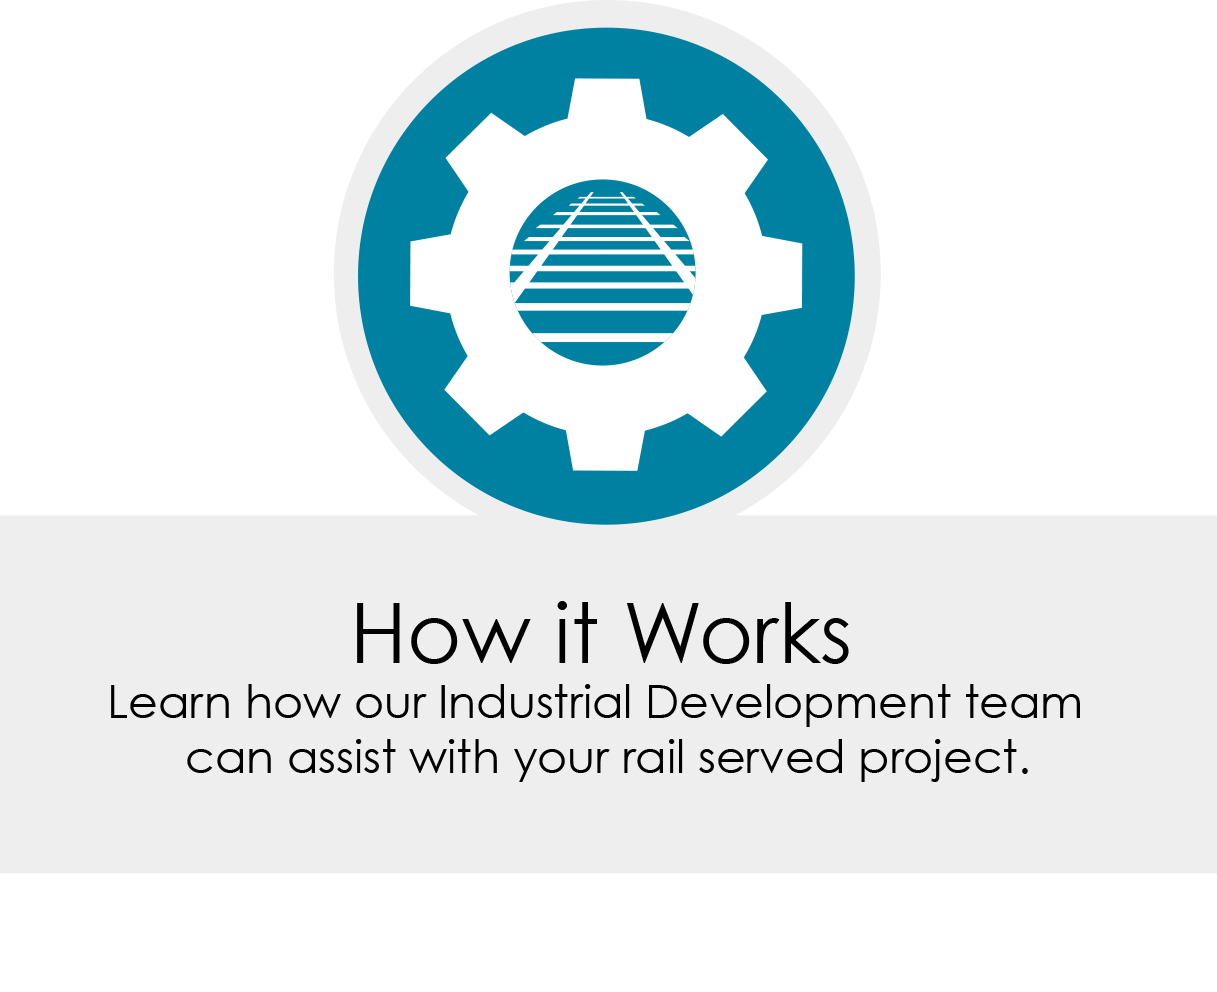 How Rail served projects work